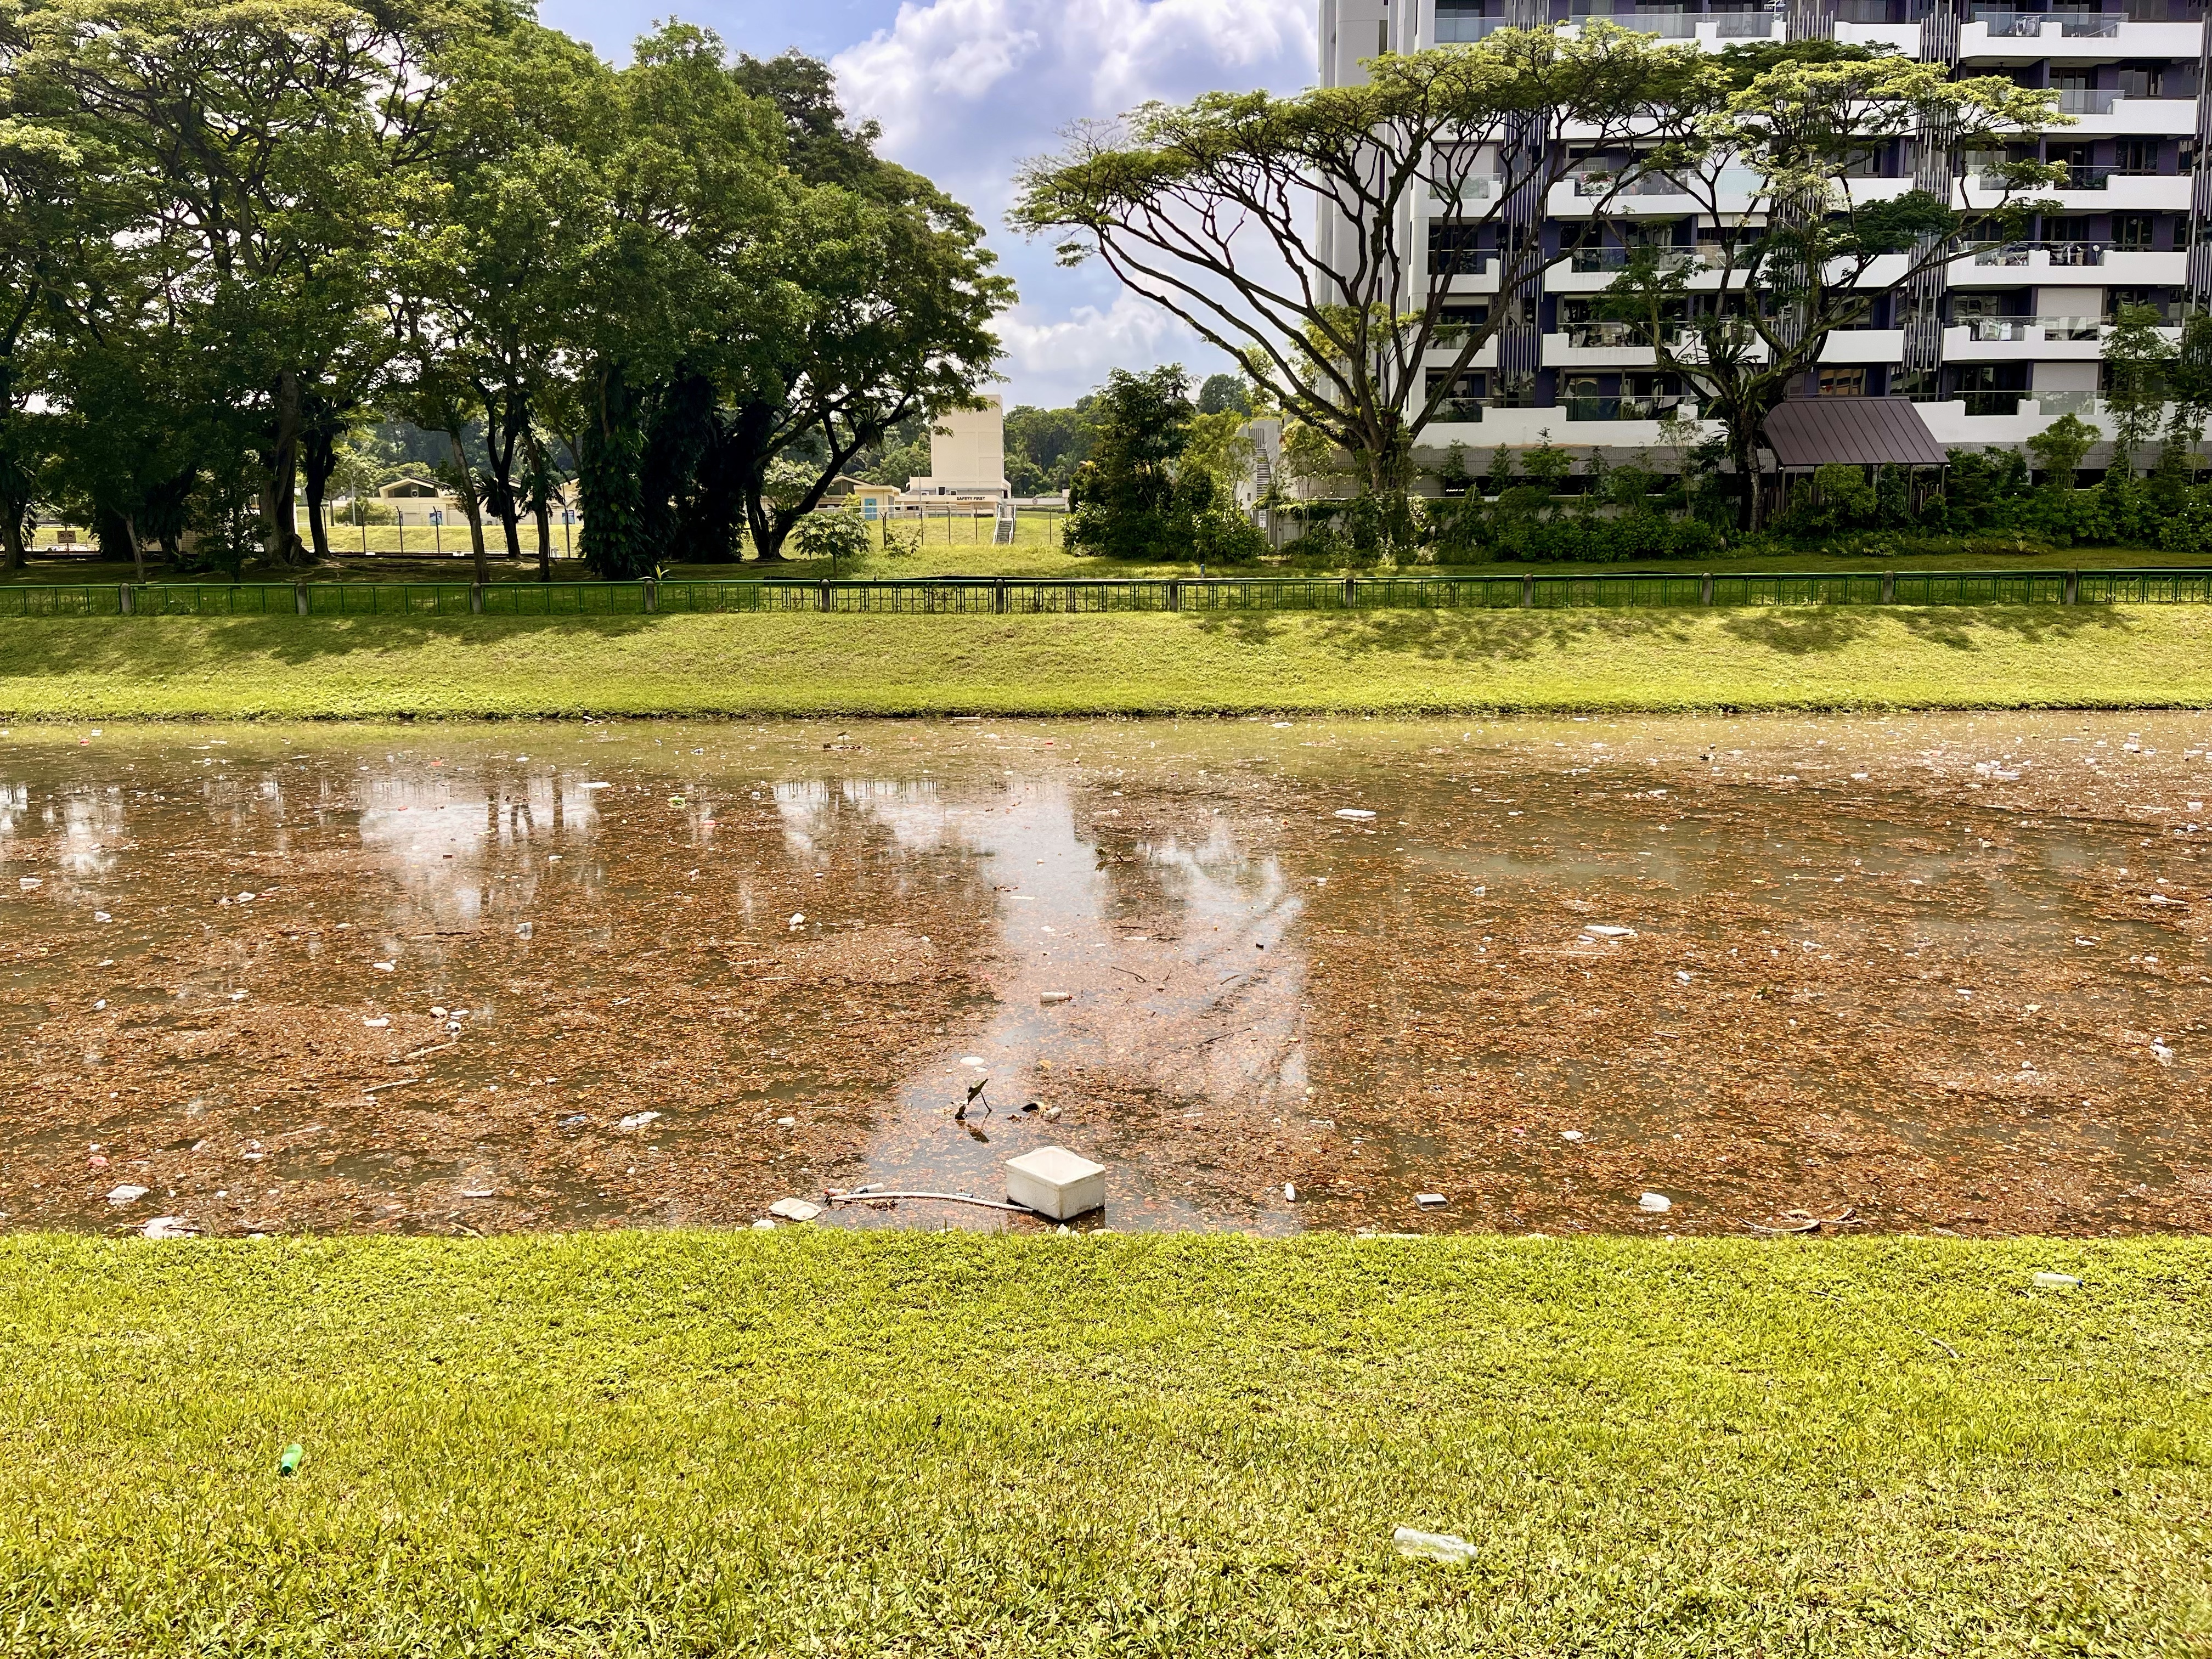 Littering and water pollution in Kallang River